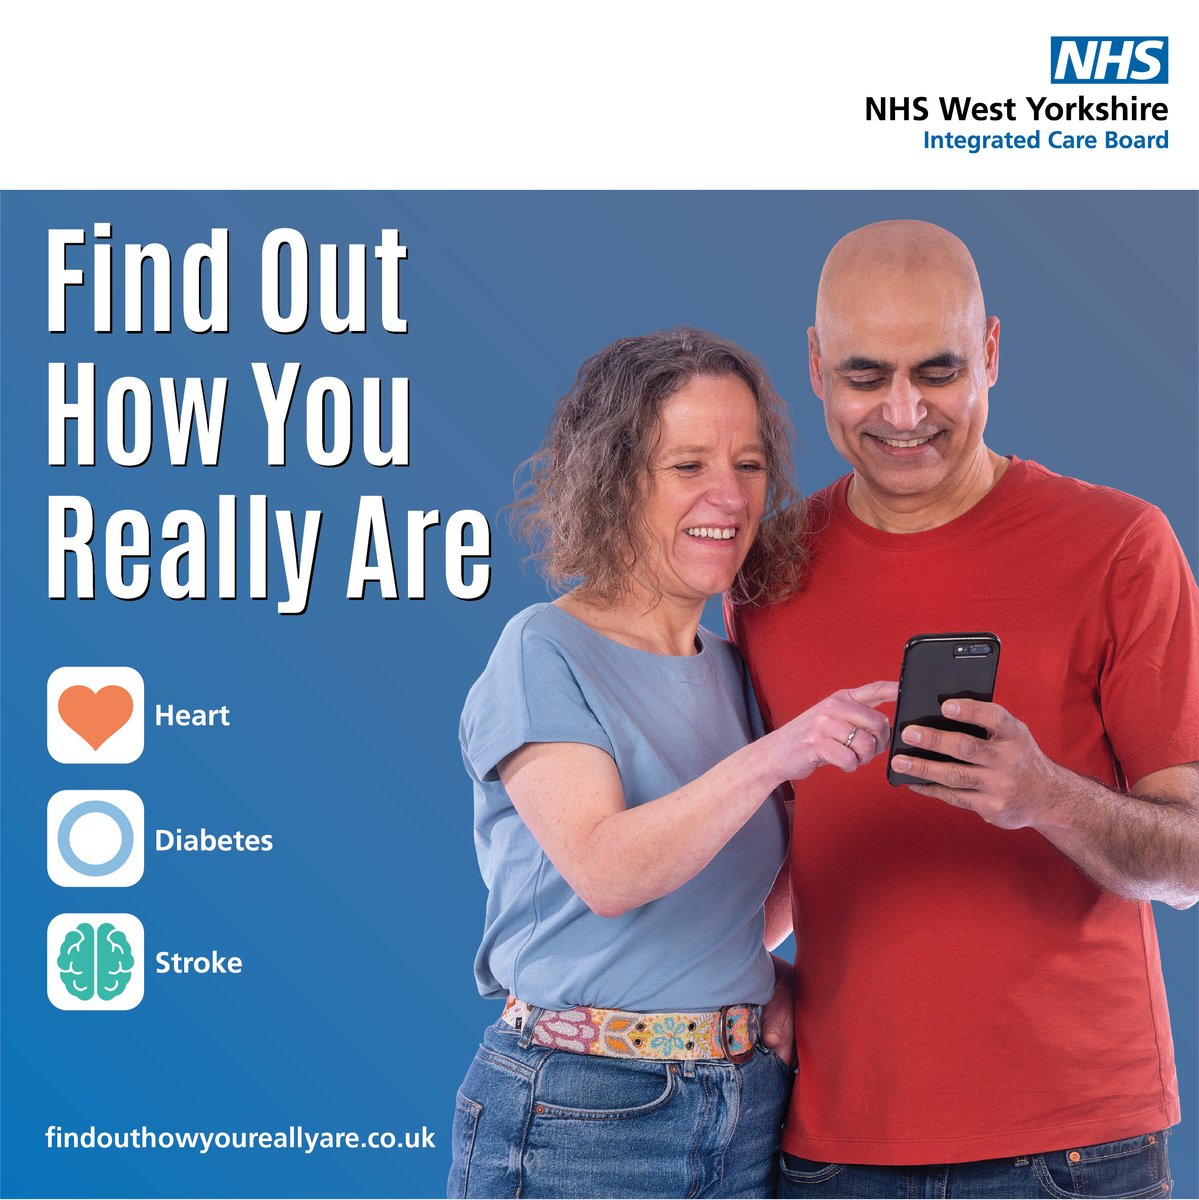 A range of factors can put you at an increased risk of conditions that affect your heart. 💗Ethnic background 💗Smoking 💗Diet 💗Raised cholesterol Take steps to stay healthy by visiting: findouthowyoureallyare.co.uk #StayHealthy